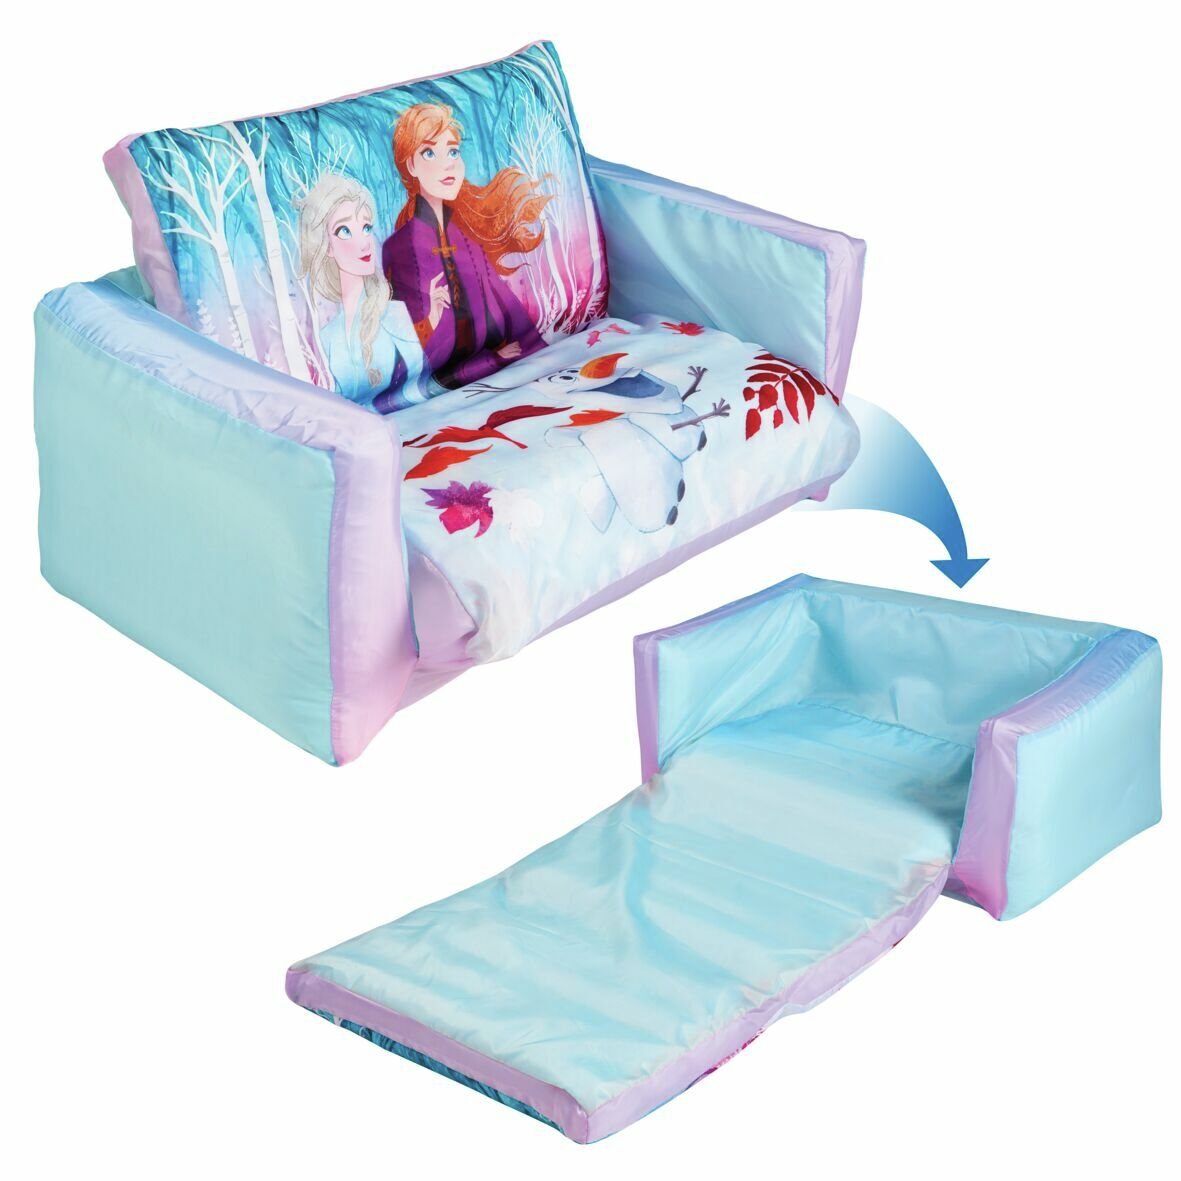 Disney Frozen 2 2-in-1 Inflatable Flip Out Sofa Review